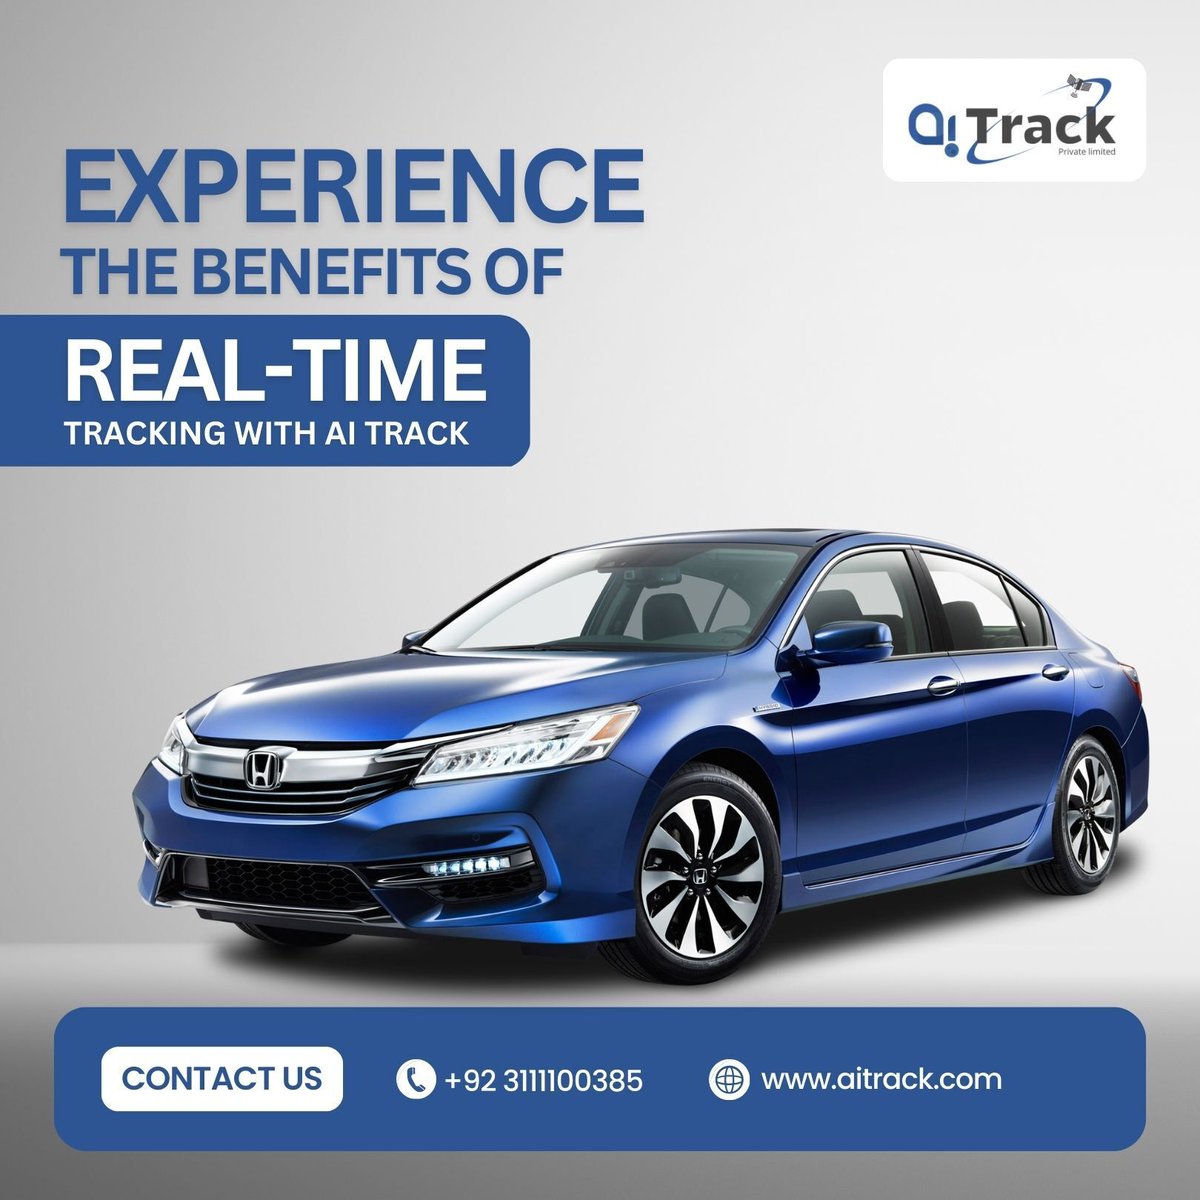 Experience the benefits of real-time data and insights with our vehicle tracking solutions. 

#AiTrack  #carsecurity #cartracker #vehicletracker